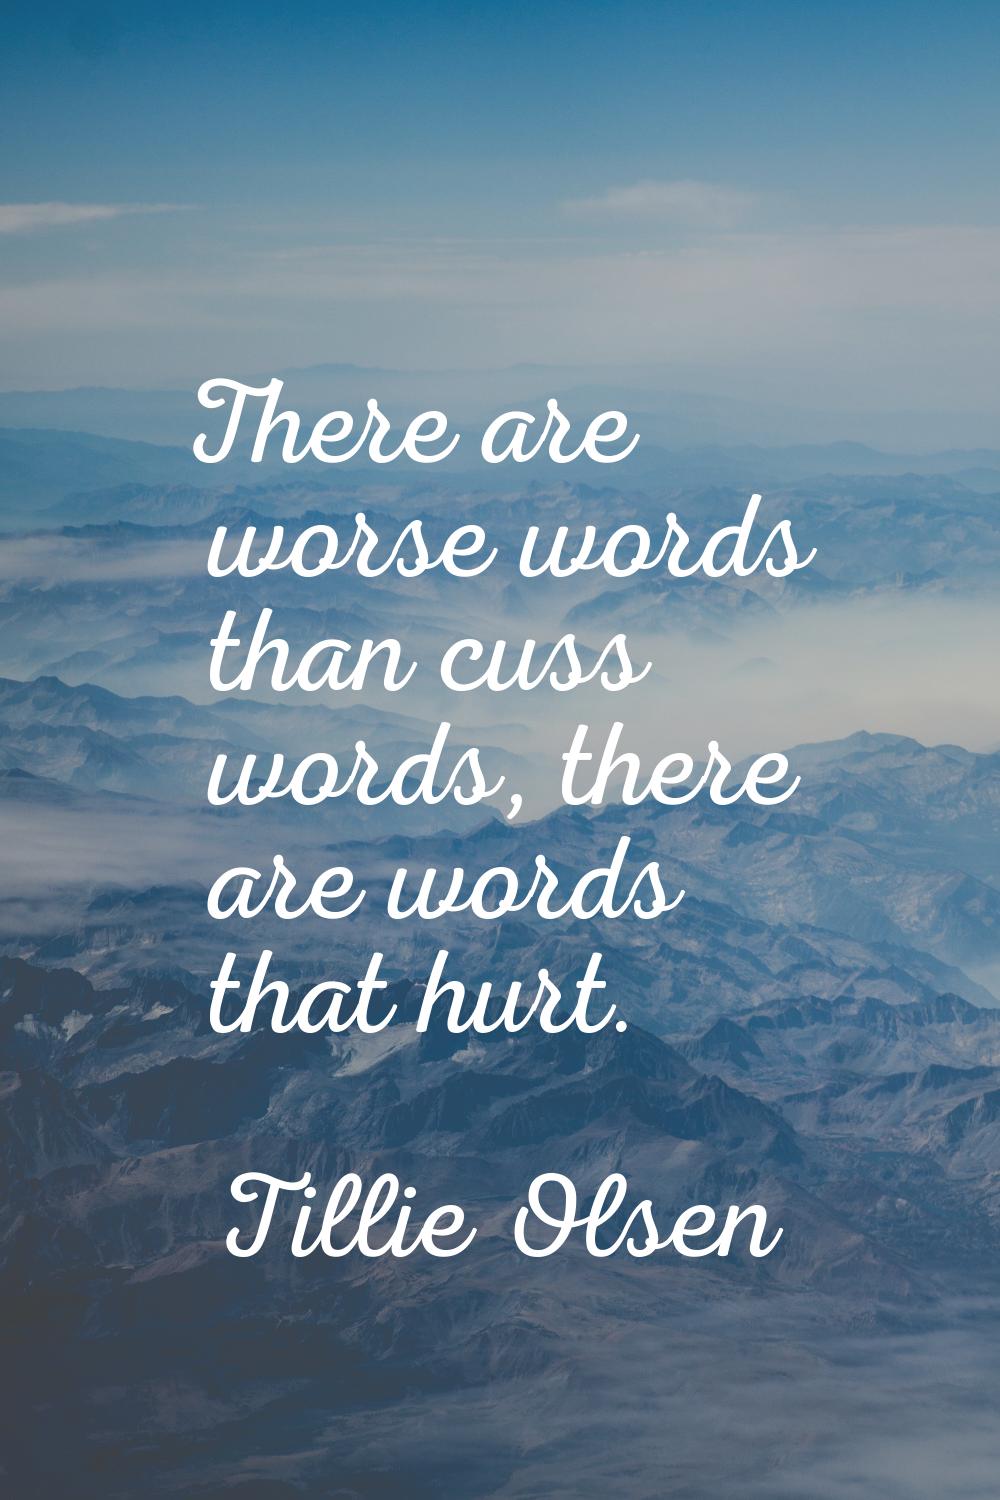 There are worse words than cuss words, there are words that hurt.